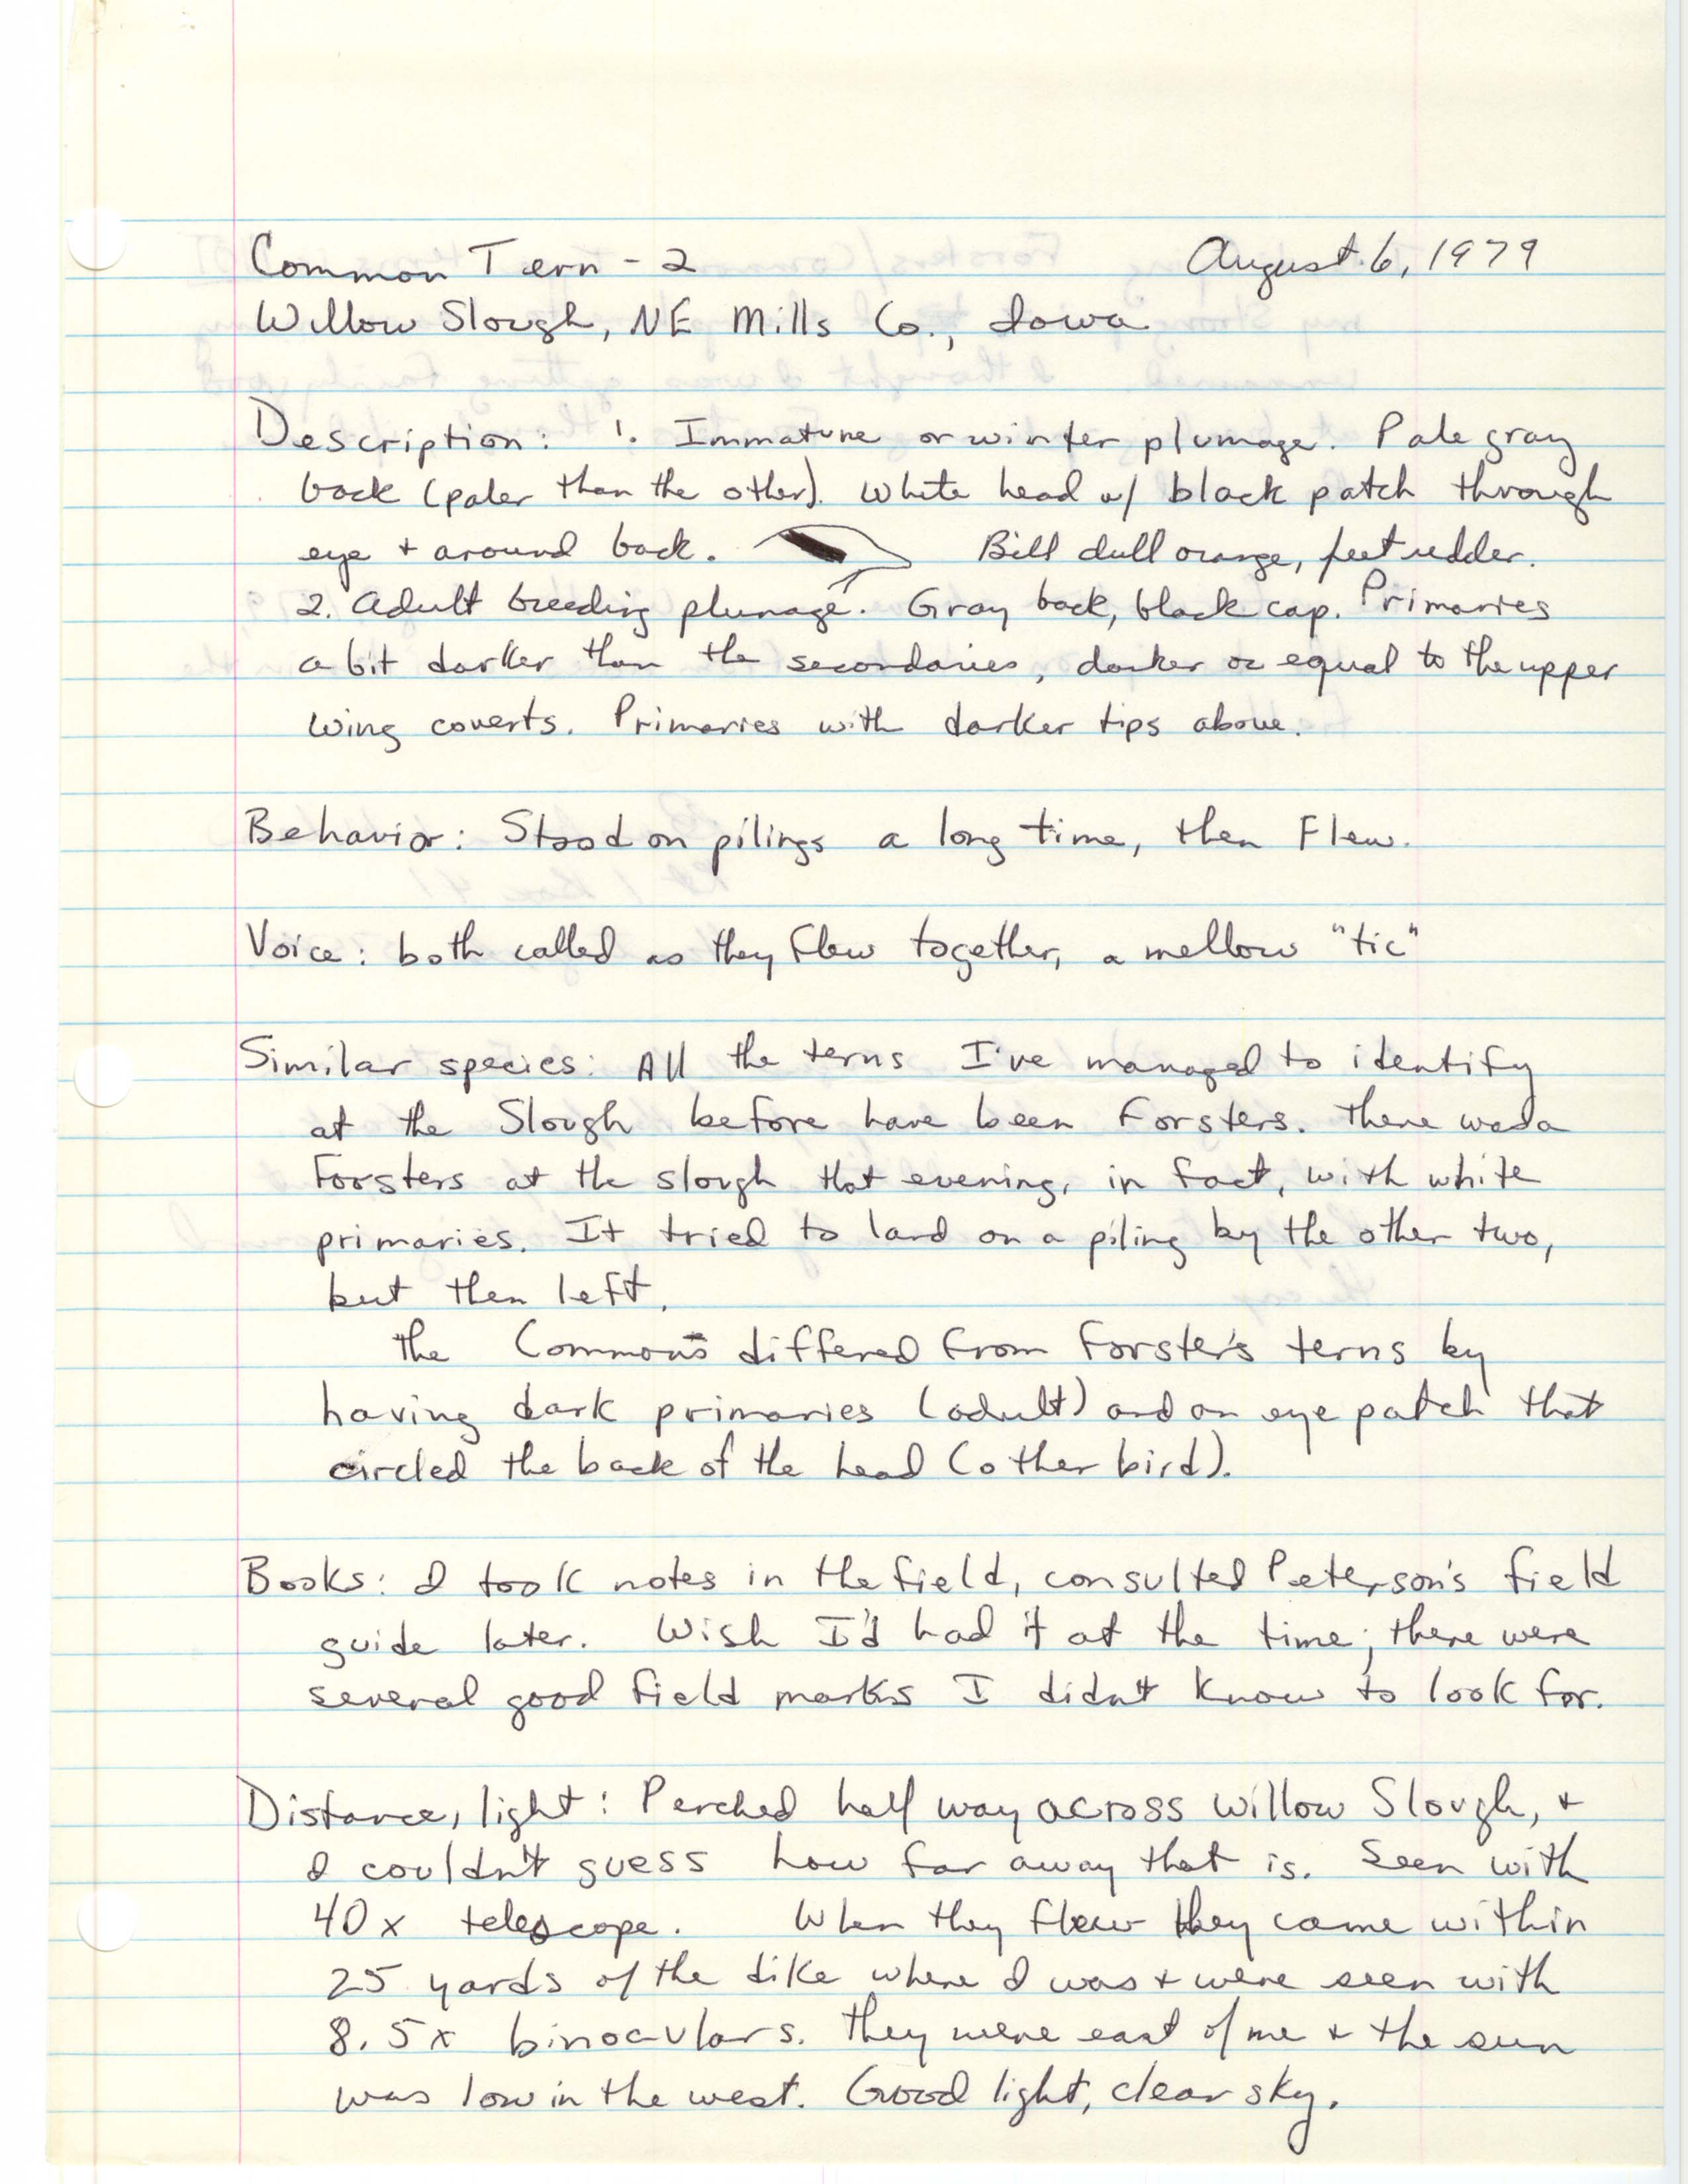 Rare bird documentation form for Common Tern at Willow Slough, 1979